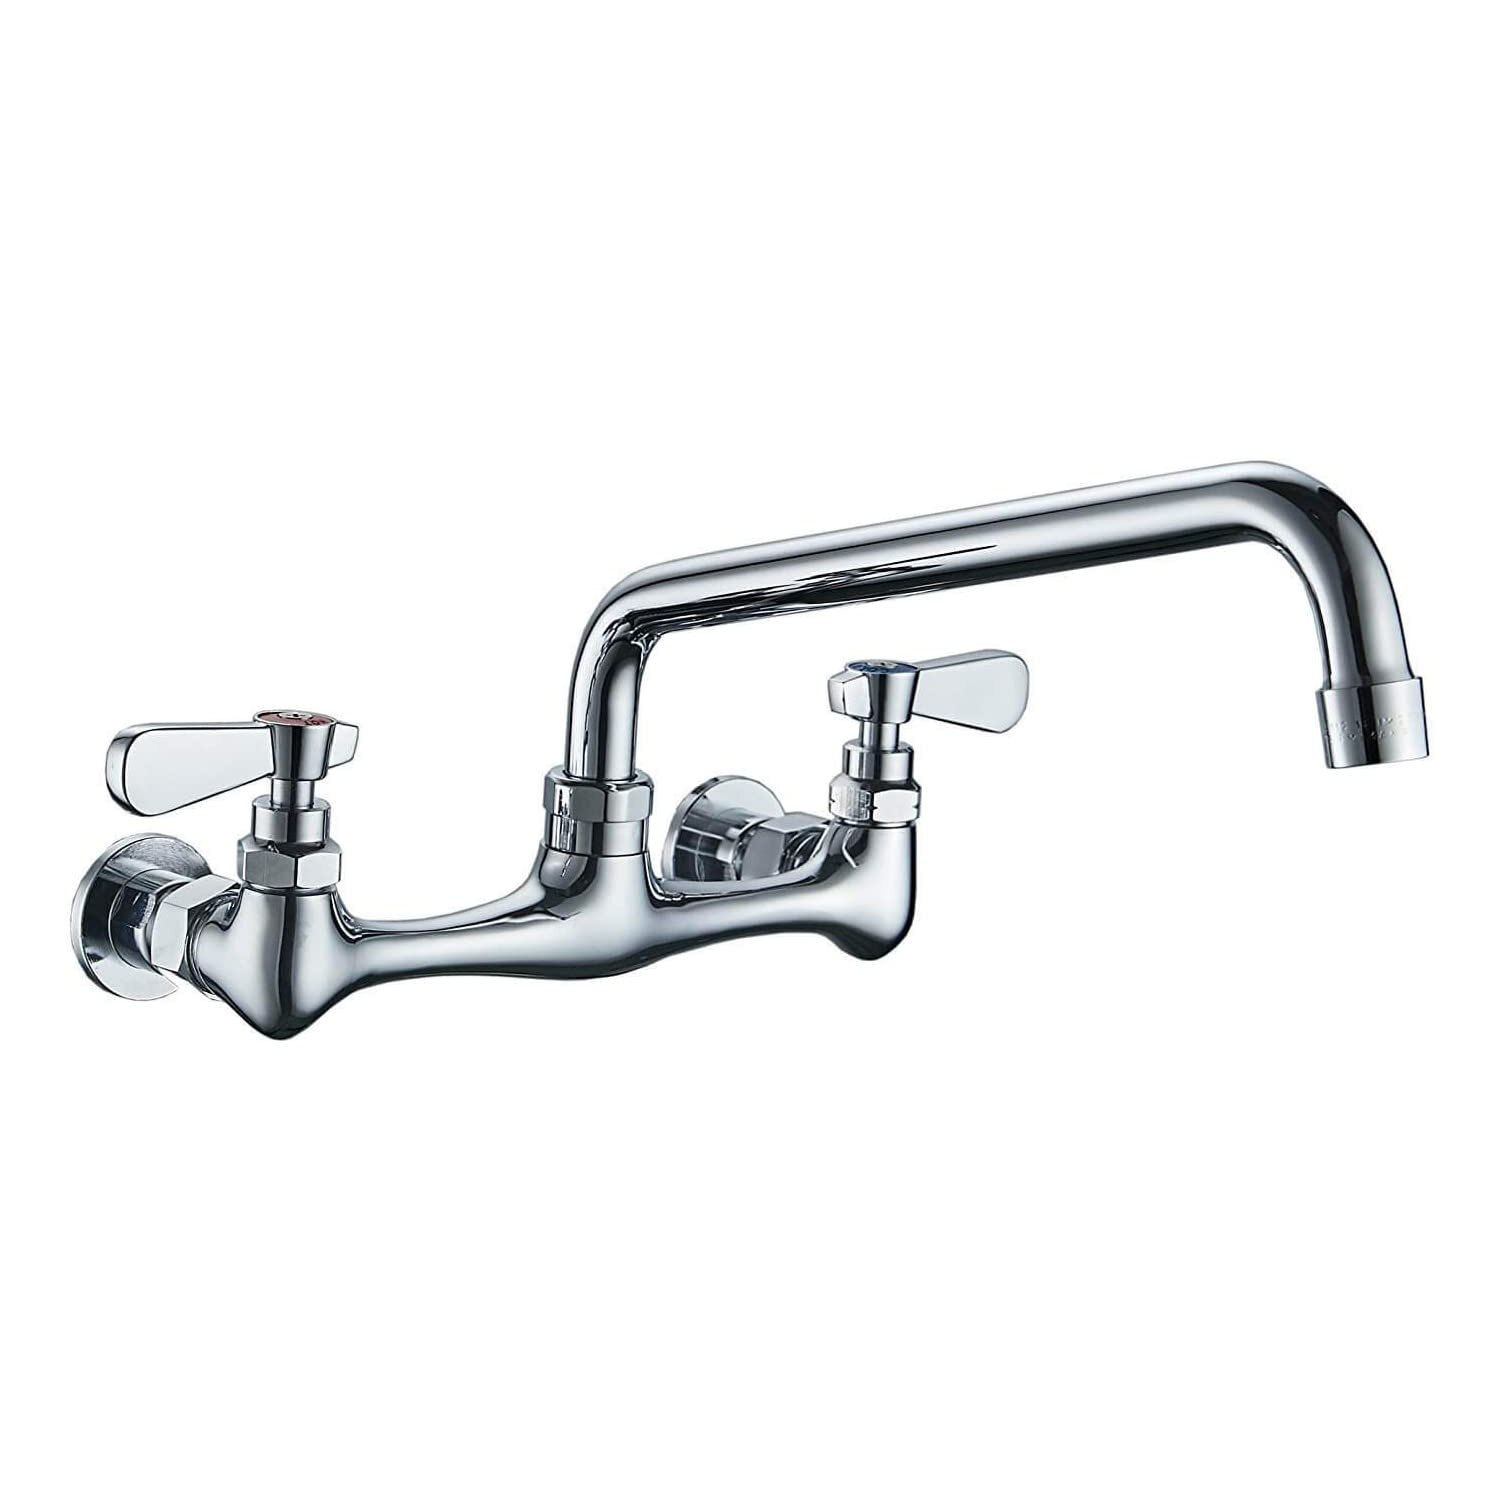 Wall Mount Kitchen Sink Faucet hot cold mixer Swivel Spout Tap Stainless Steel